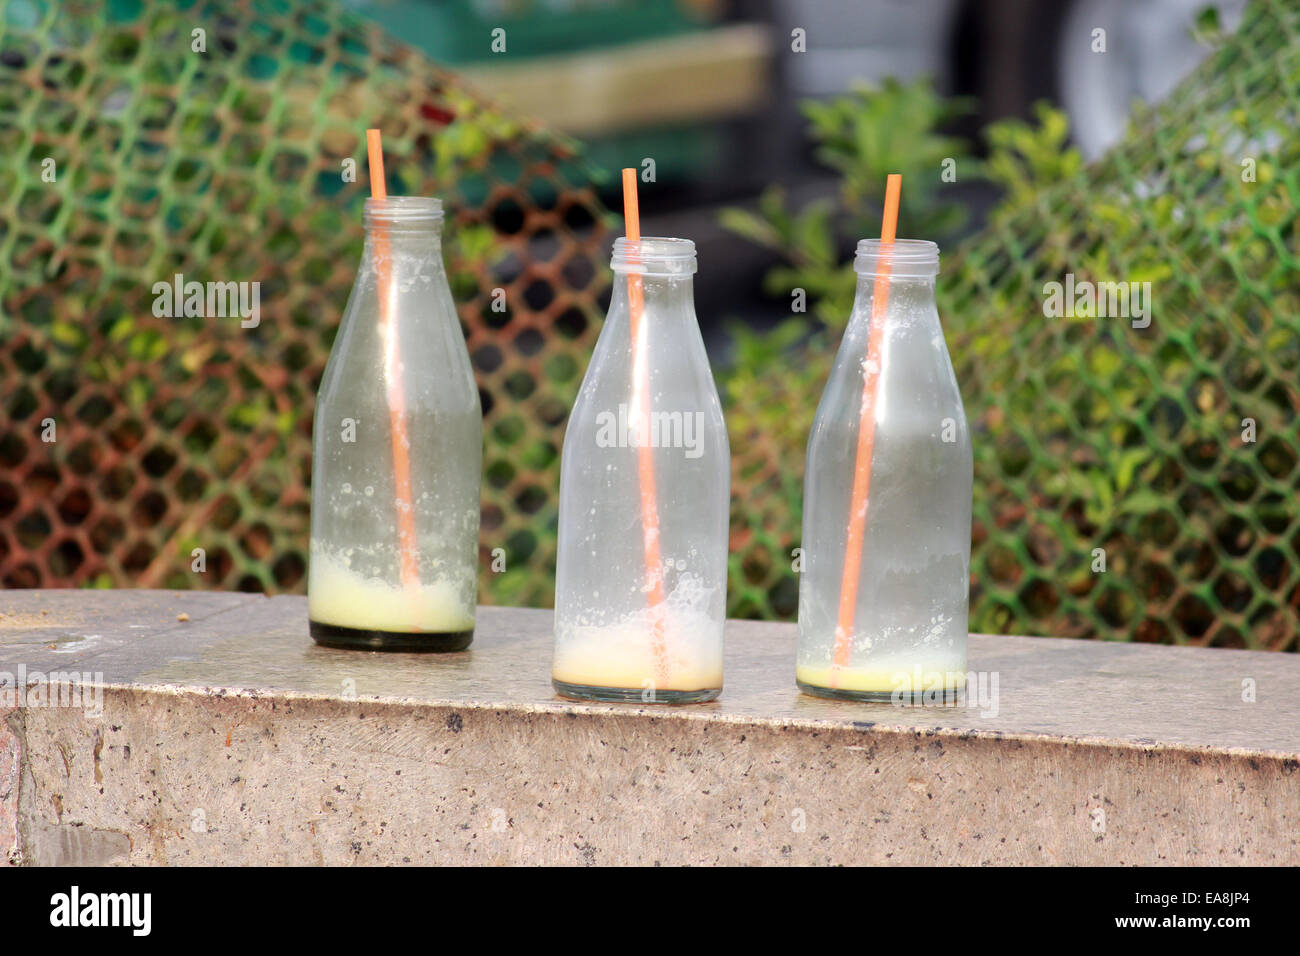 https://c8.alamy.com/comp/EA8JP4/bottles-straw-milk-three-glassempty-putting-on-the-wall-in-connaught-EA8JP4.jpg